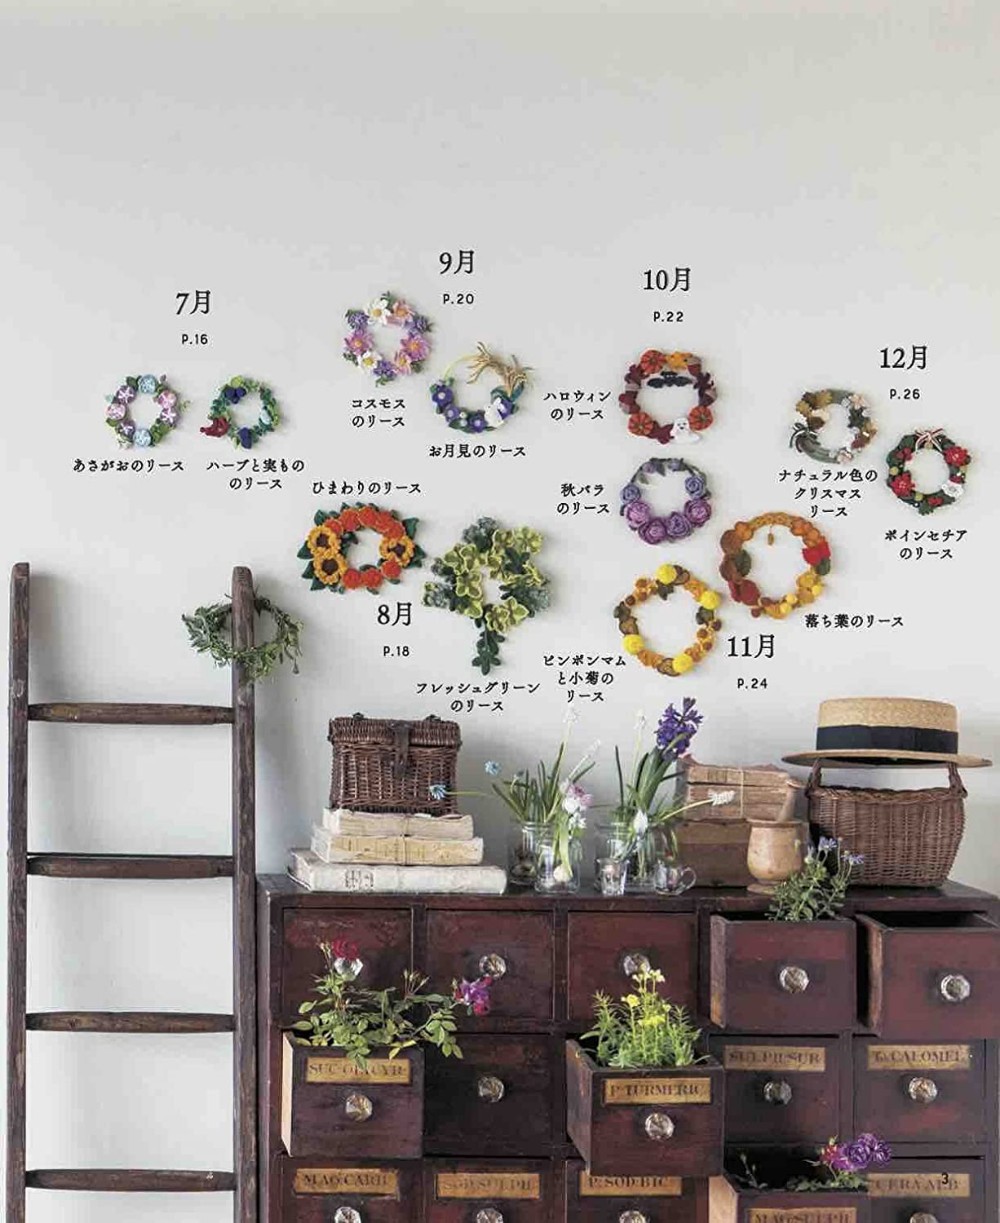 12 month flower wreath knitted with embroidery thread and crochet (applemints)